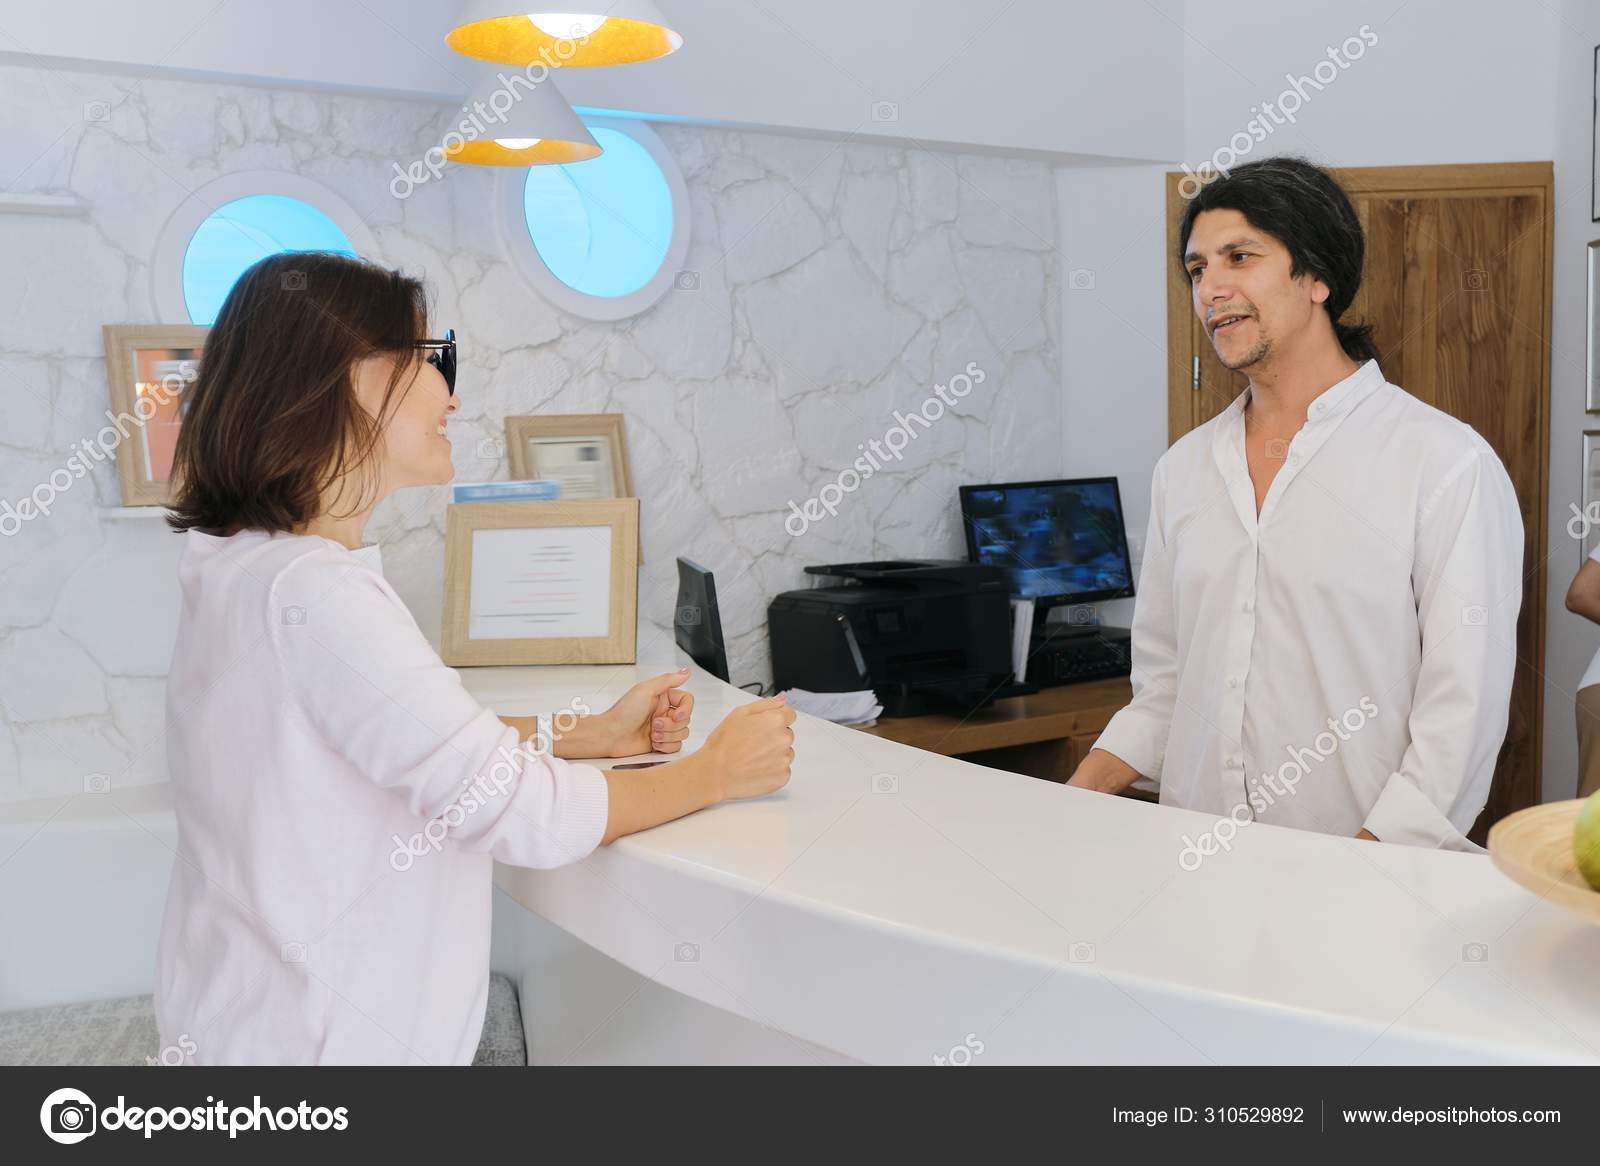 Resort Hotel Front Desk Woman Guest Talking To Man Working At